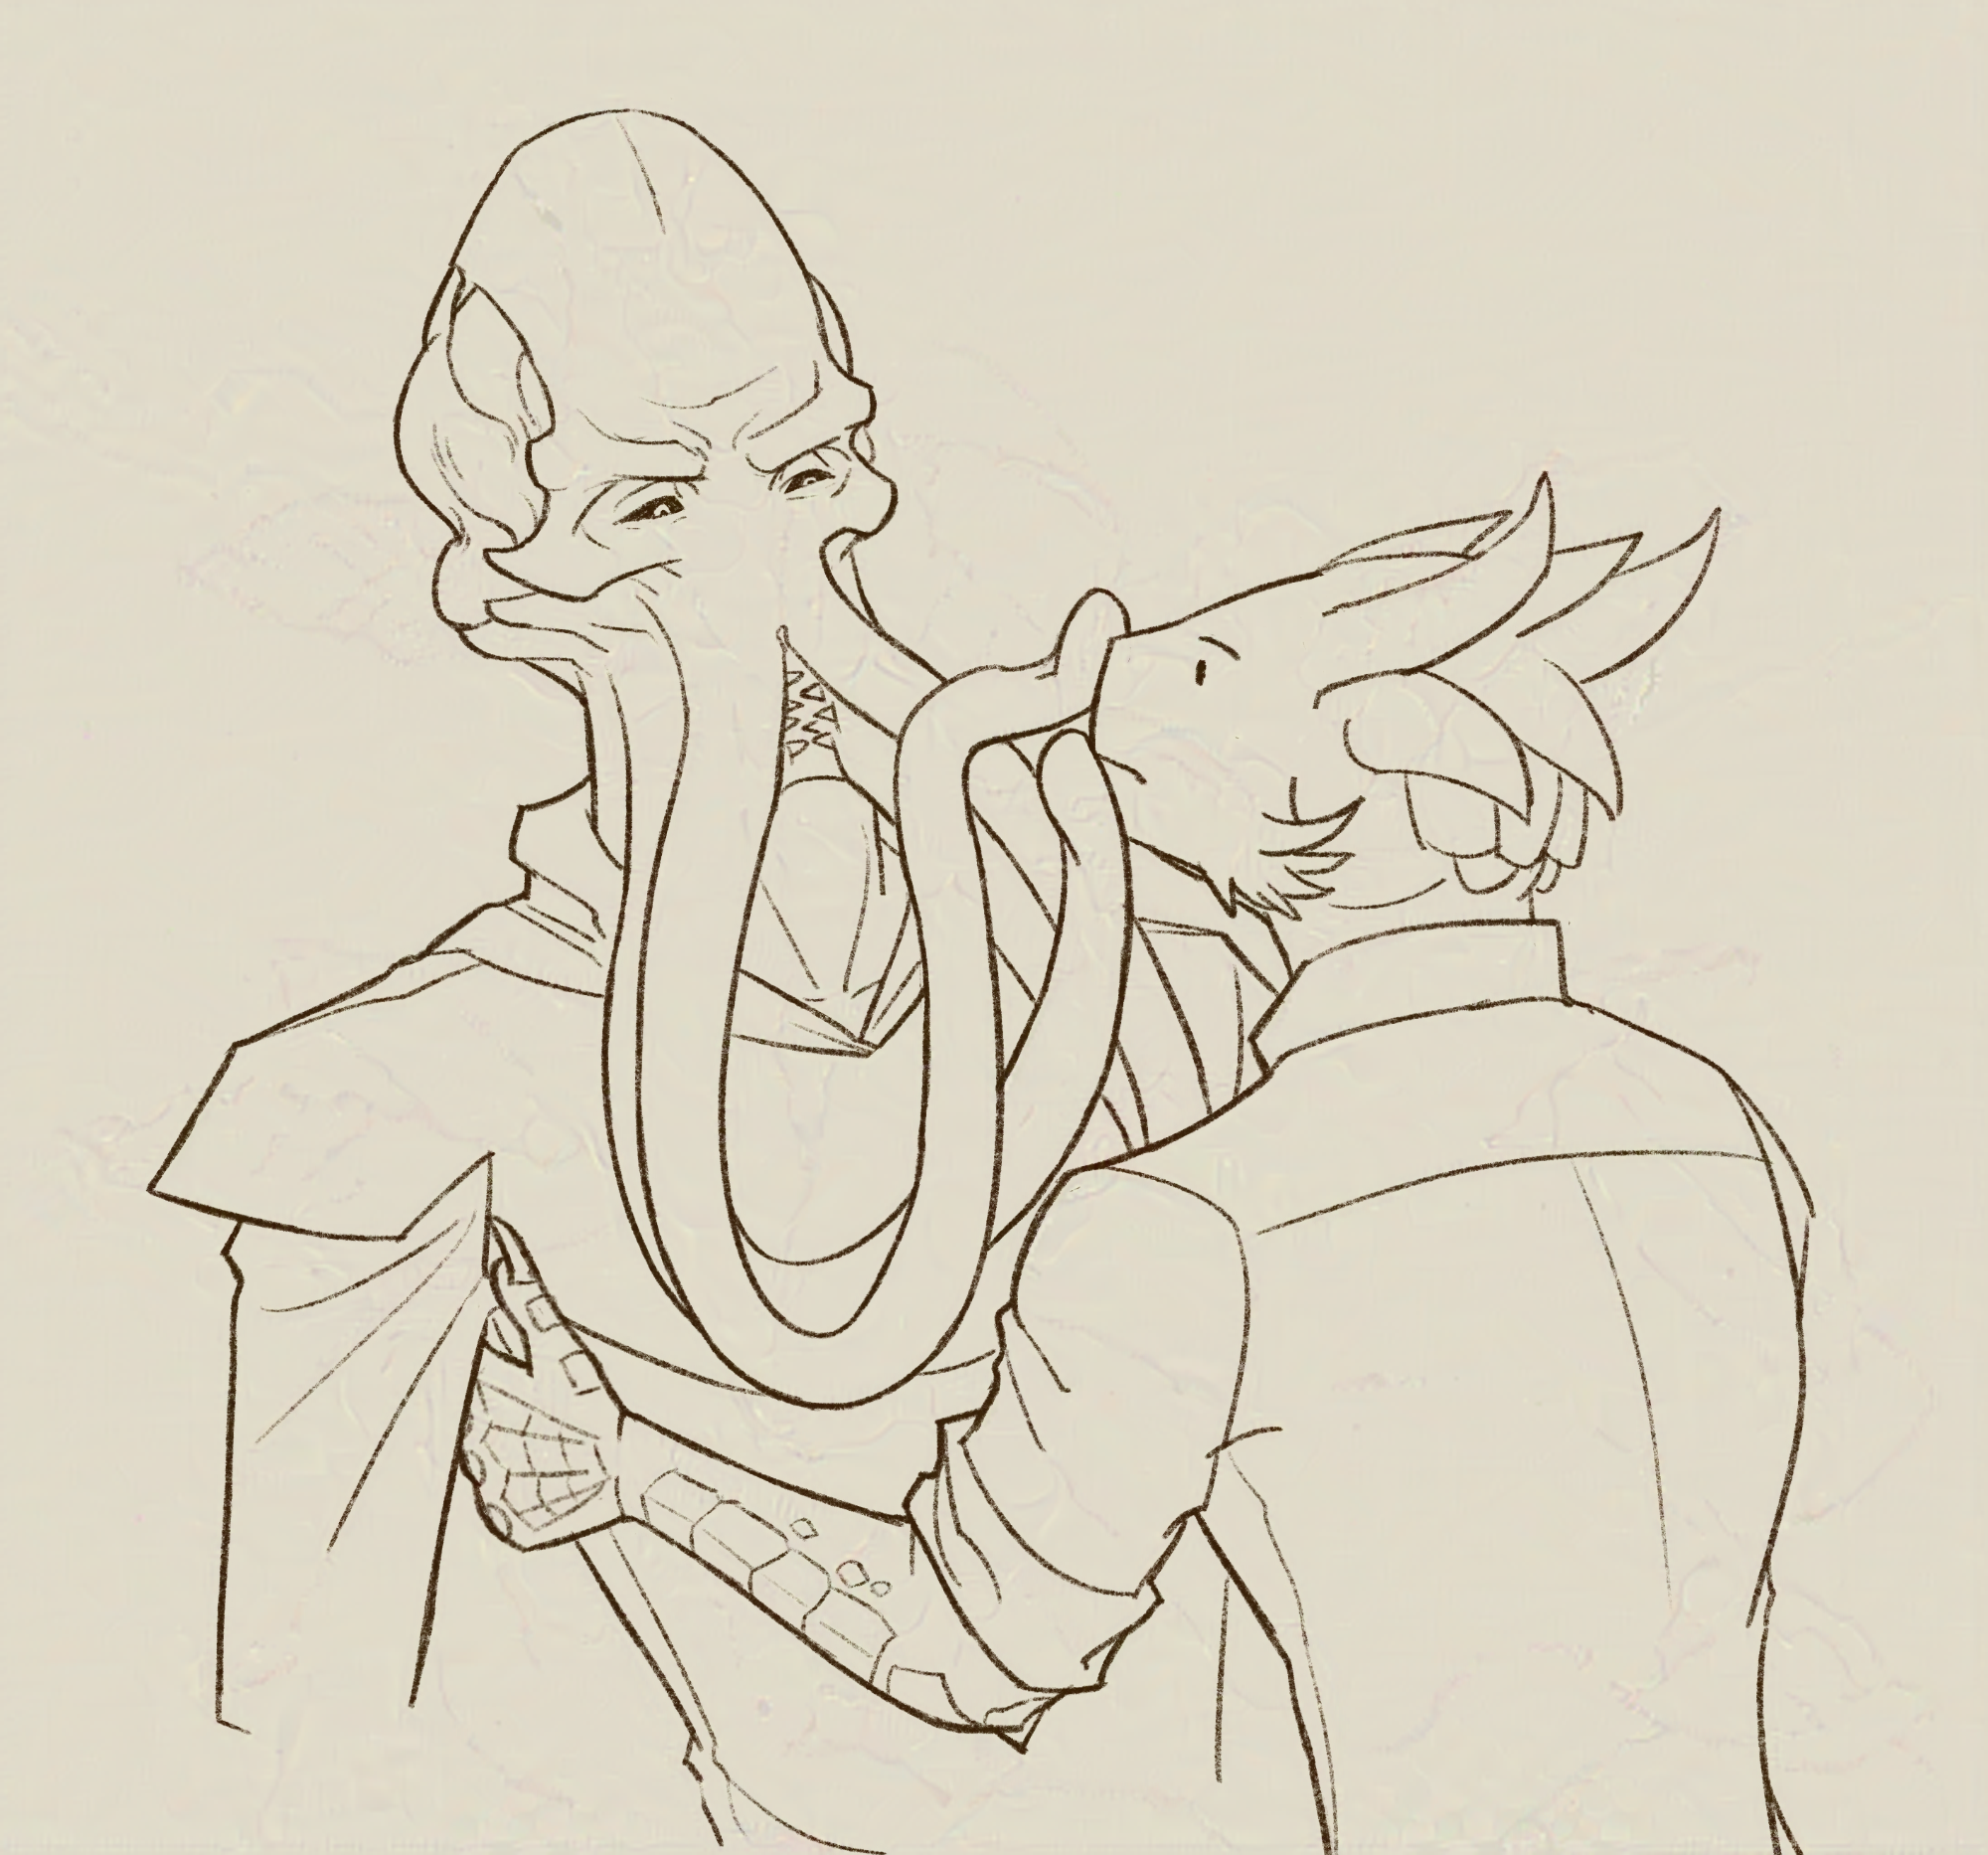 The Emperor (an illithid) is frowning and pushing away Daamric (a dragonborn) away with their tentacles as the latter is leaning in for a kiss.